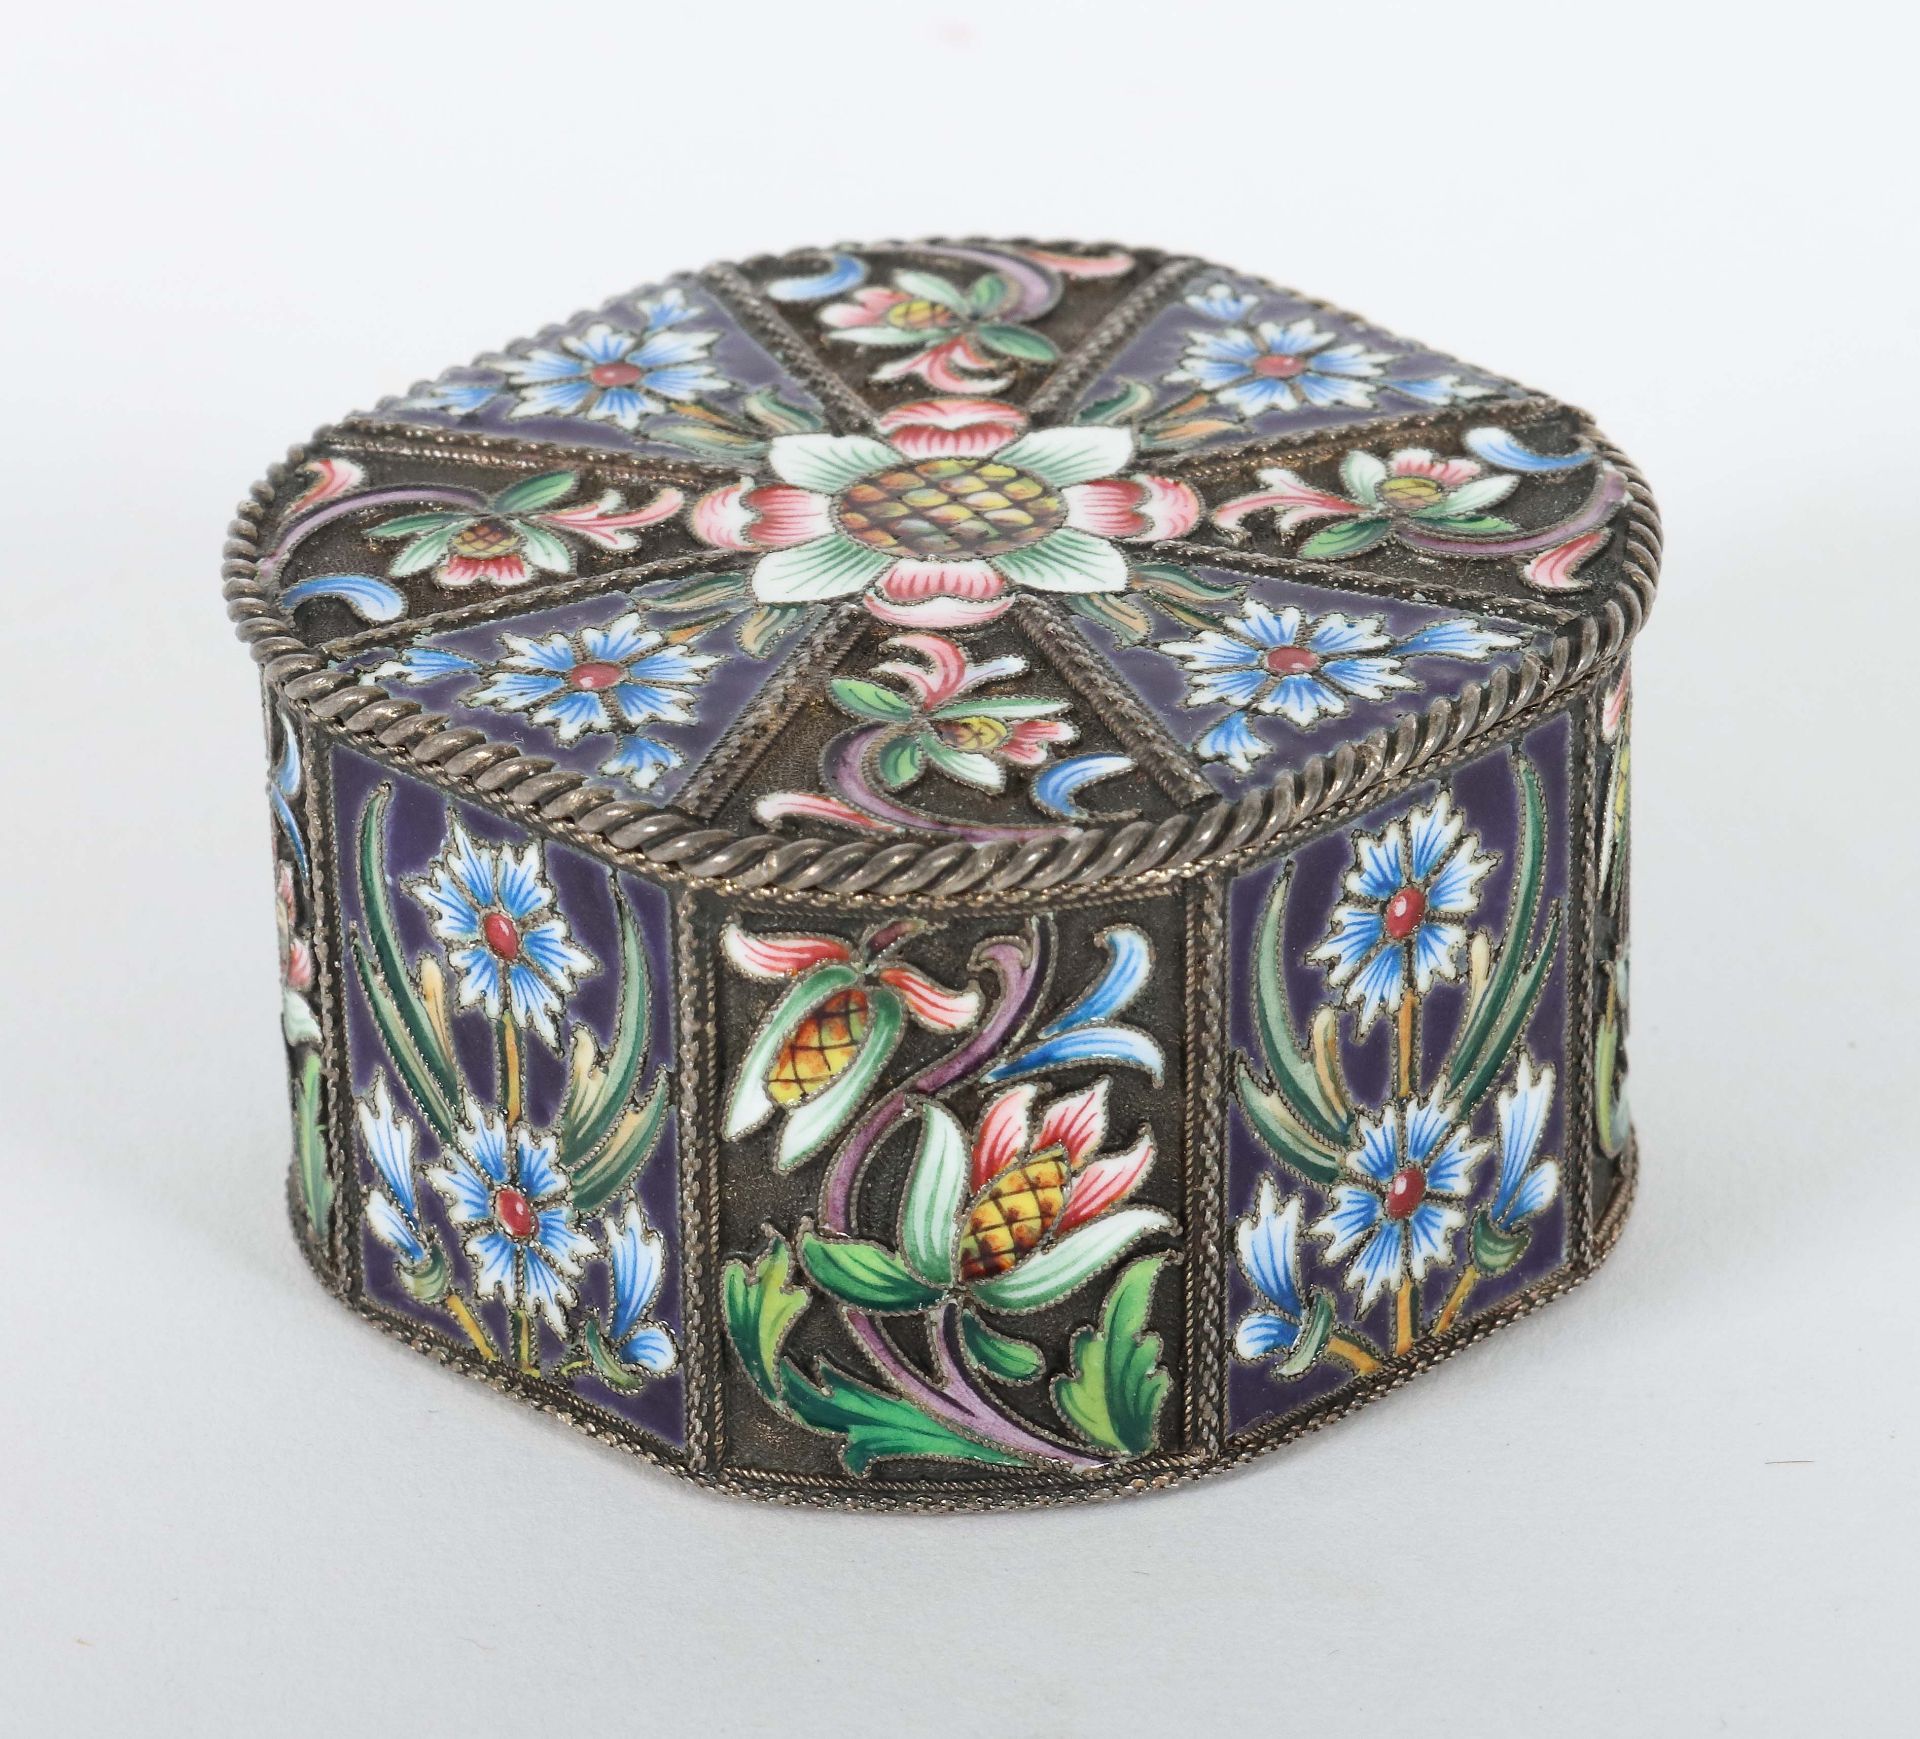 Cloisonné-Emaille-Deckeldose wohl - Image 2 of 6